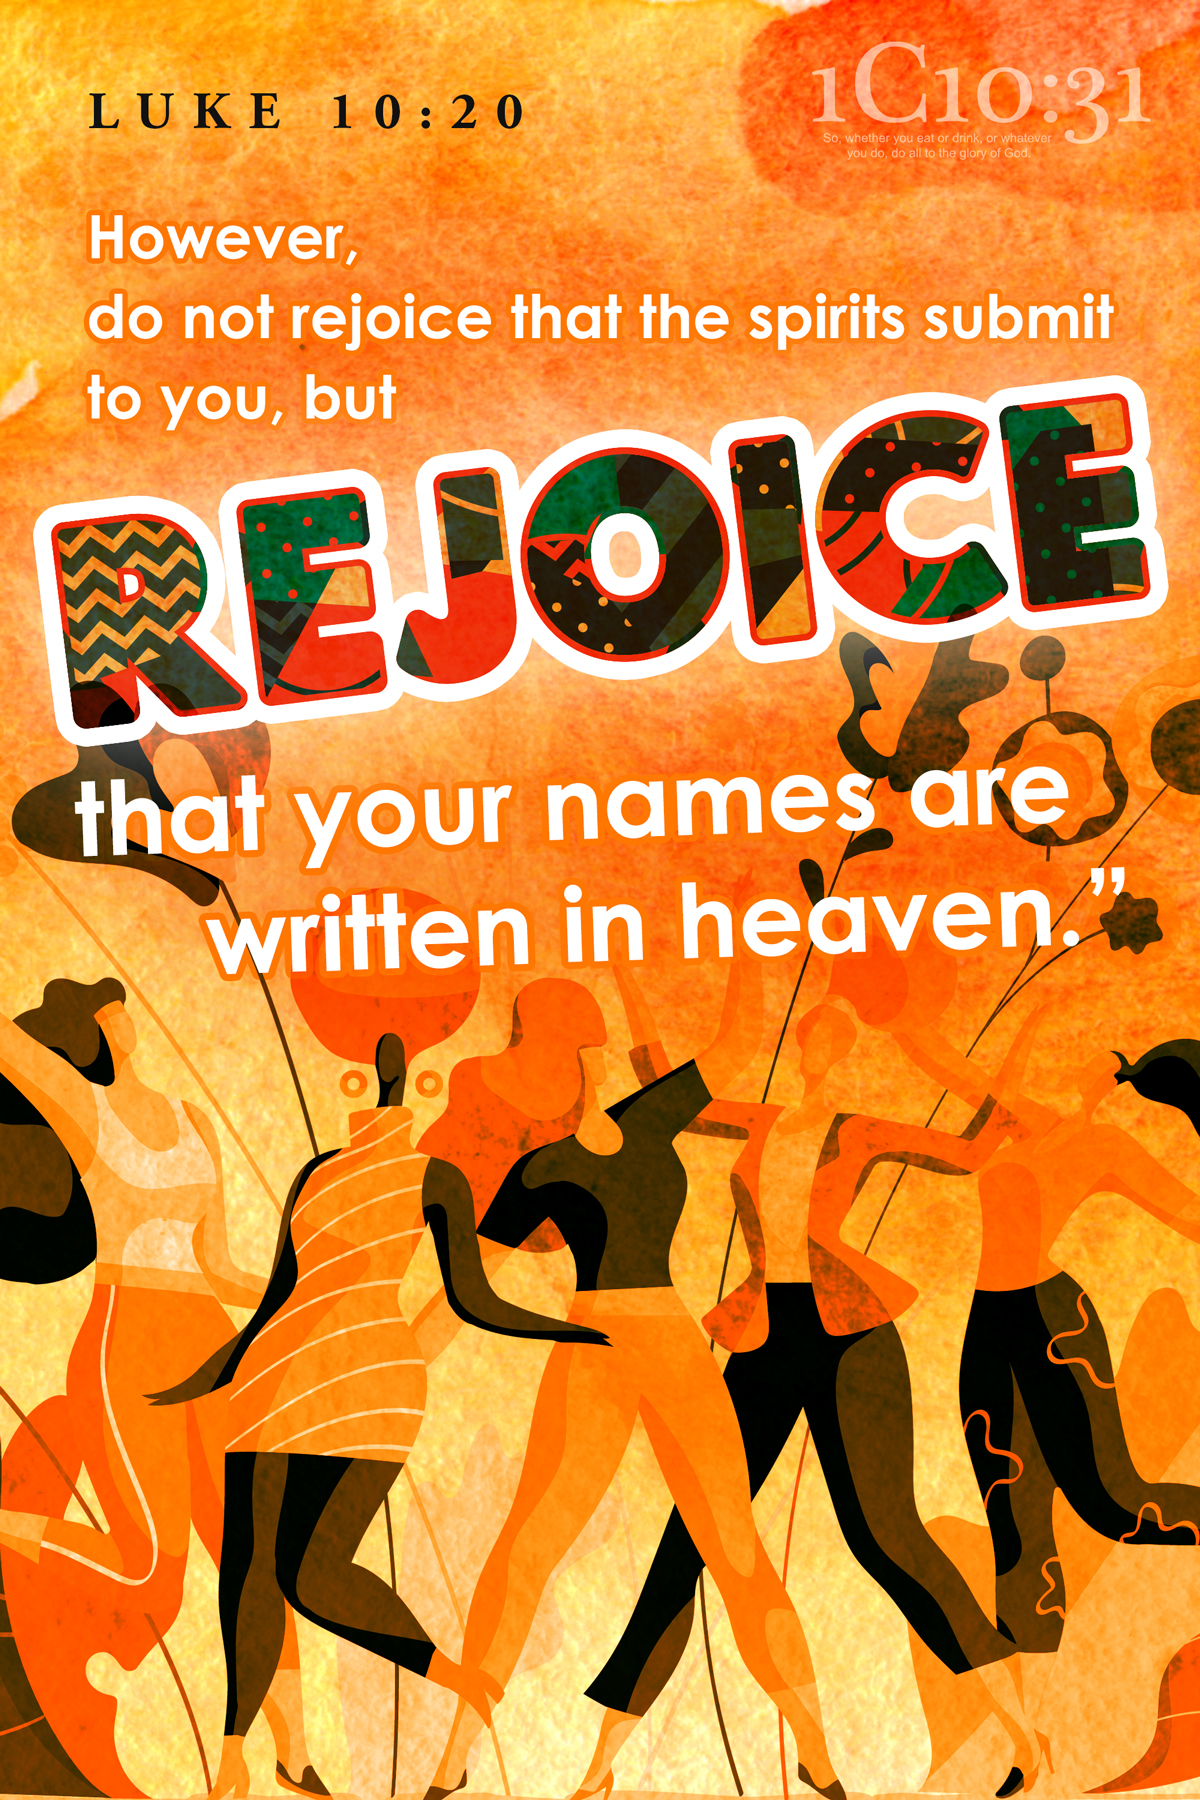 rejoice that your names are written in heaven